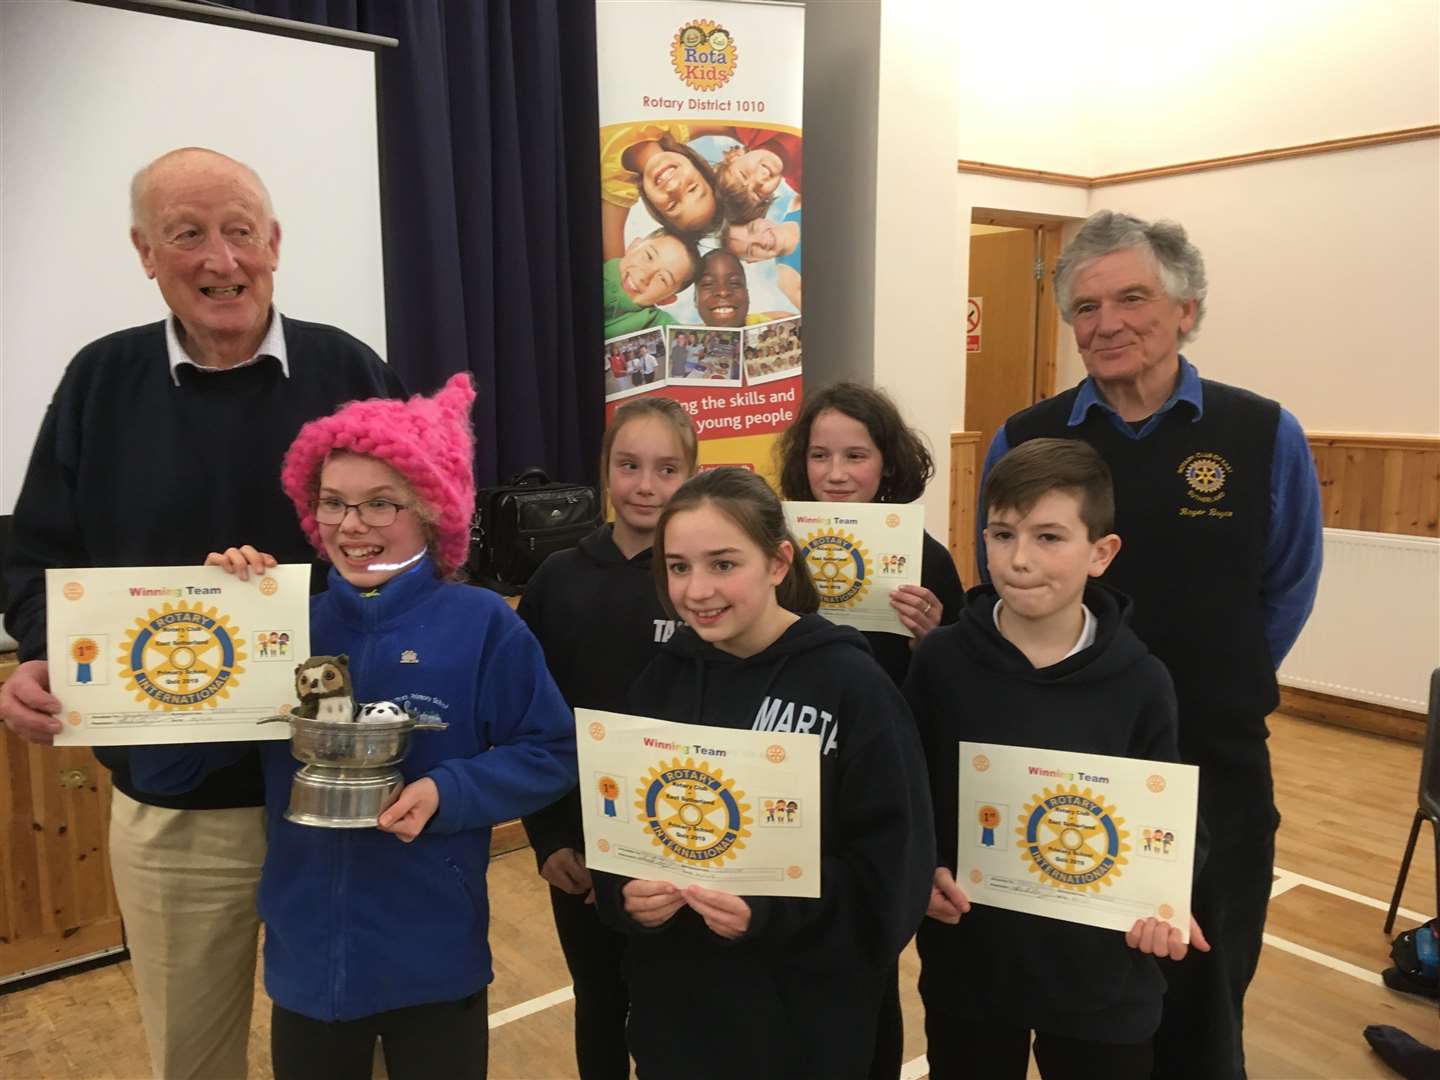 The winning Dornoch team with questionmaster Roger Boyce (right) and Alistair Risk from East Sutherland Rotary.